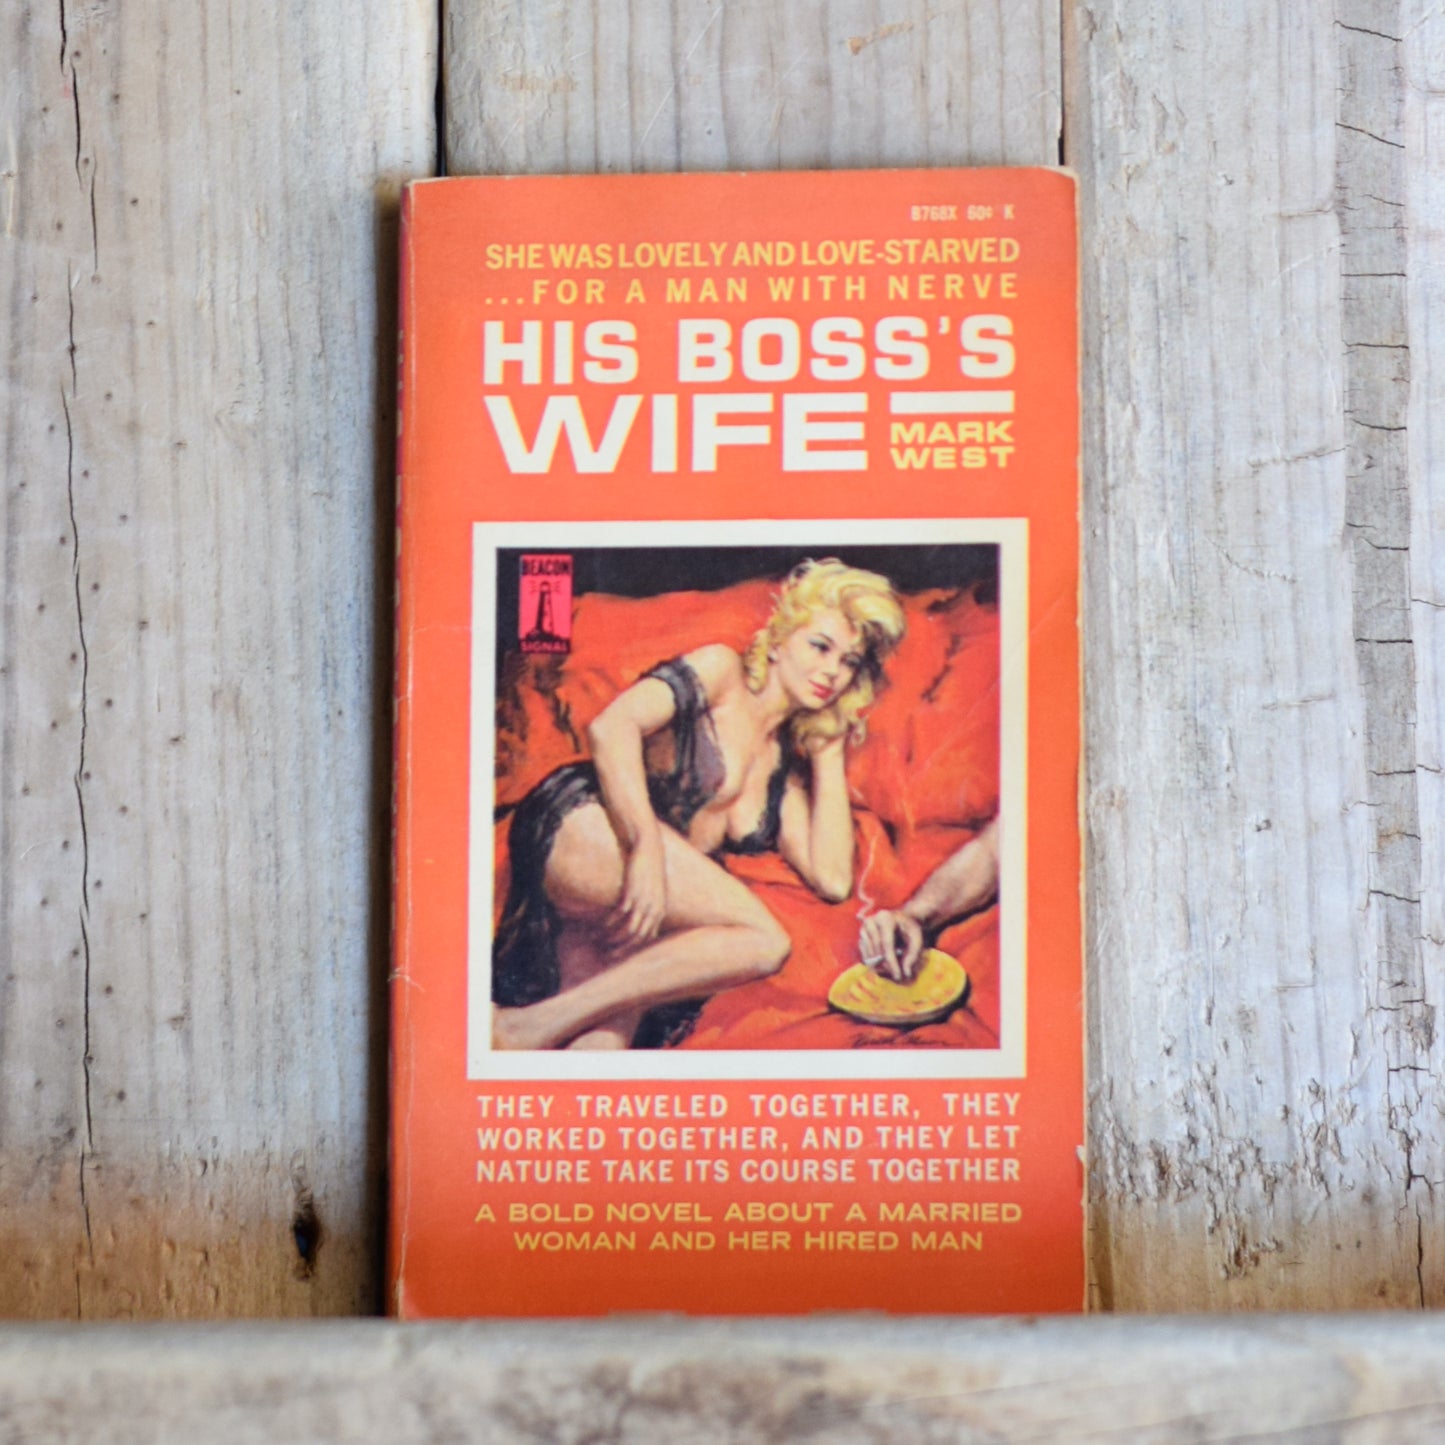 Vintage Adult Fiction Paperback: Mark West - His Boss's Wife SECOND PRINTING